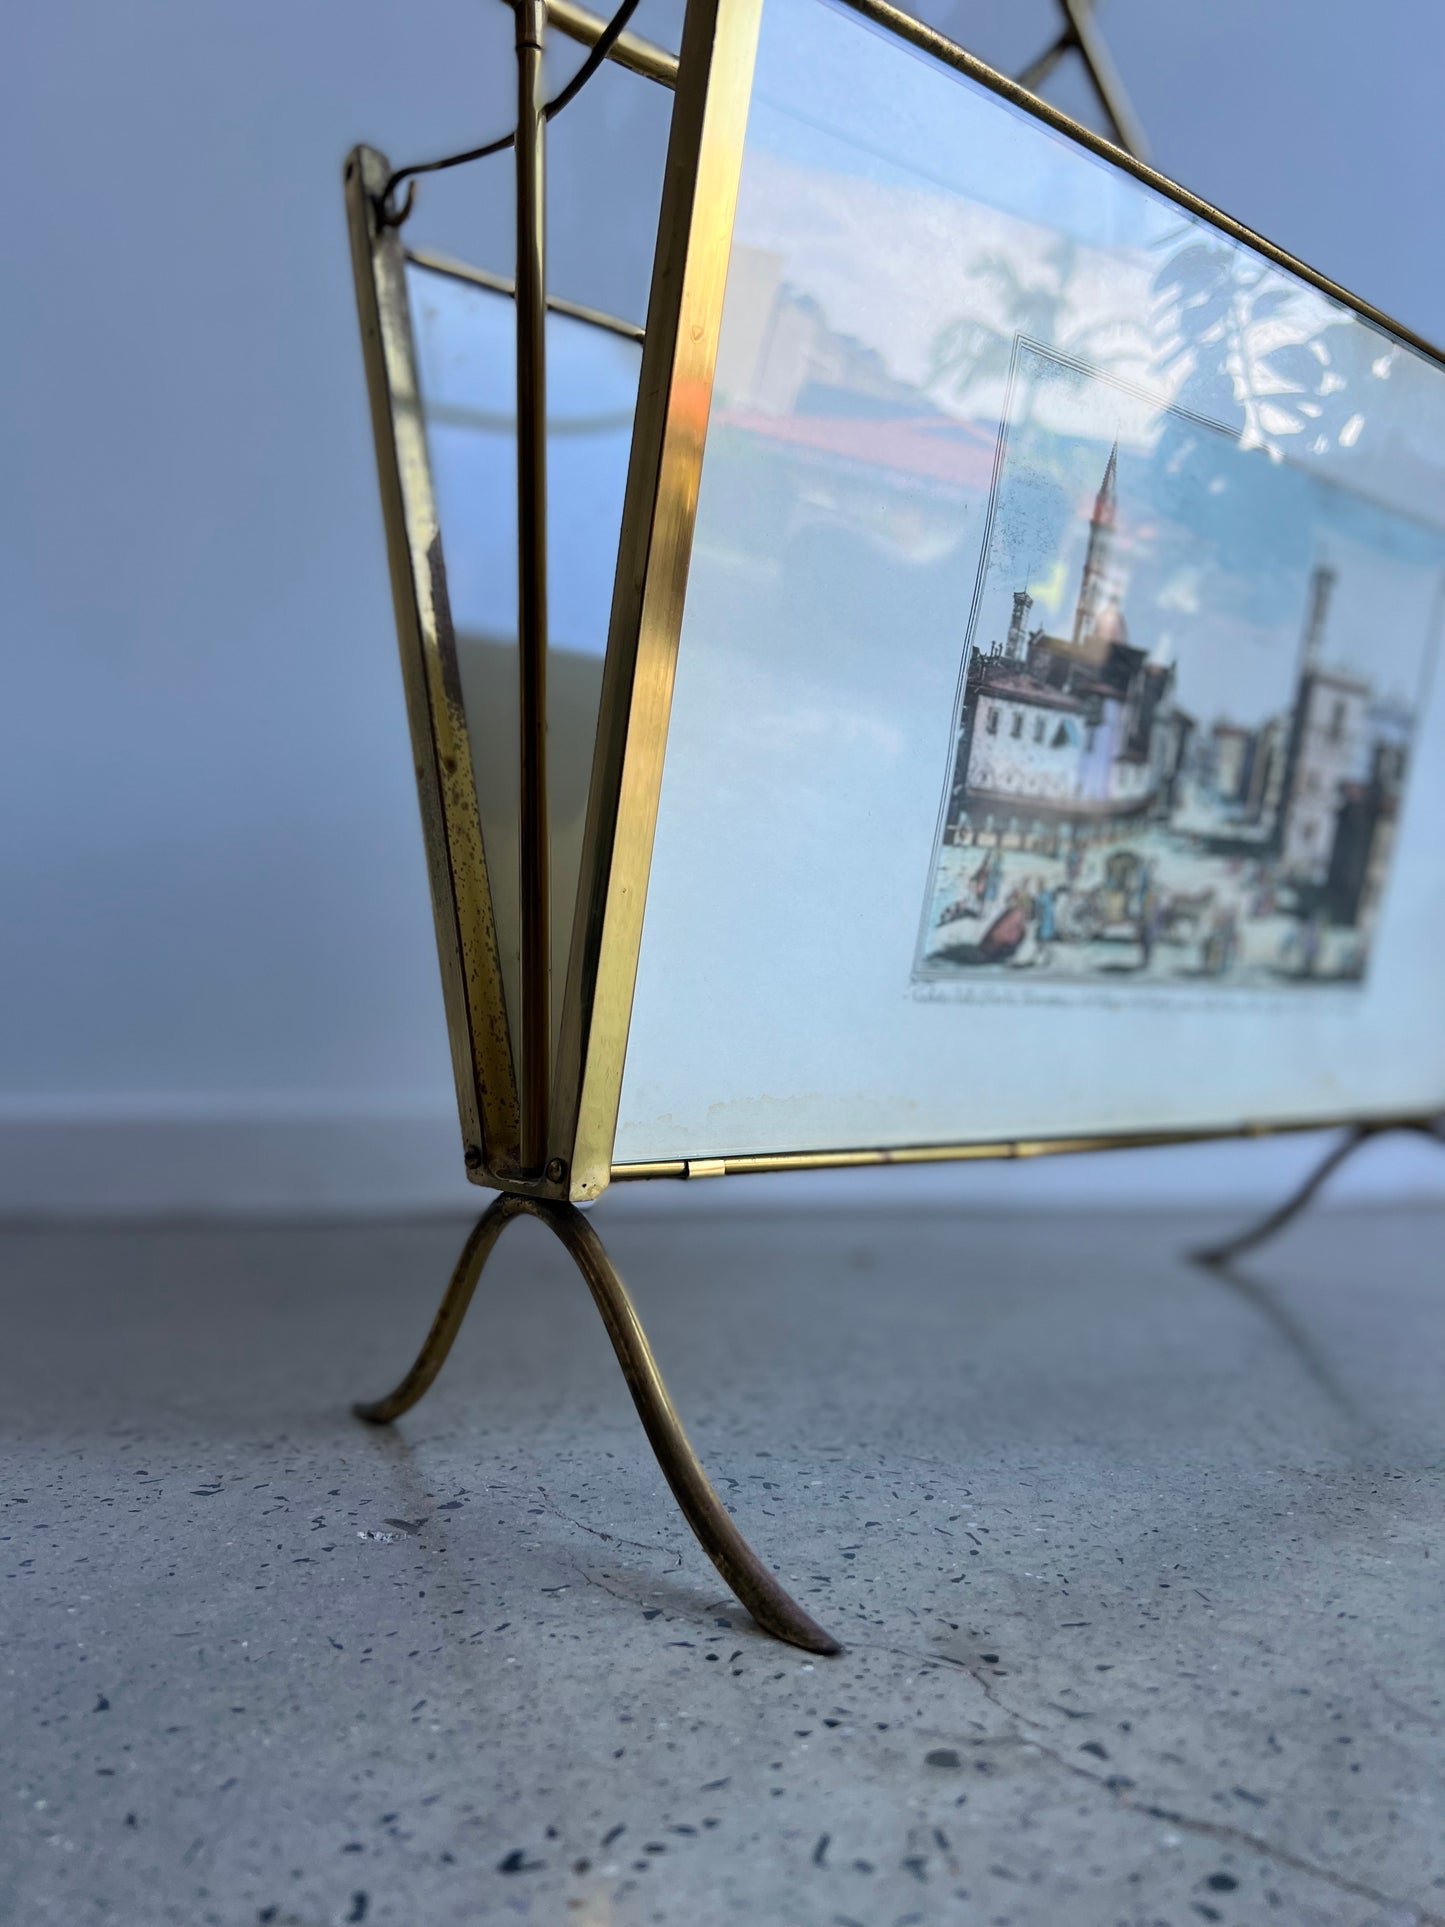 Italian Magazine Holder in Brass and Glass with Florence imagines on Both Sides , 1950s